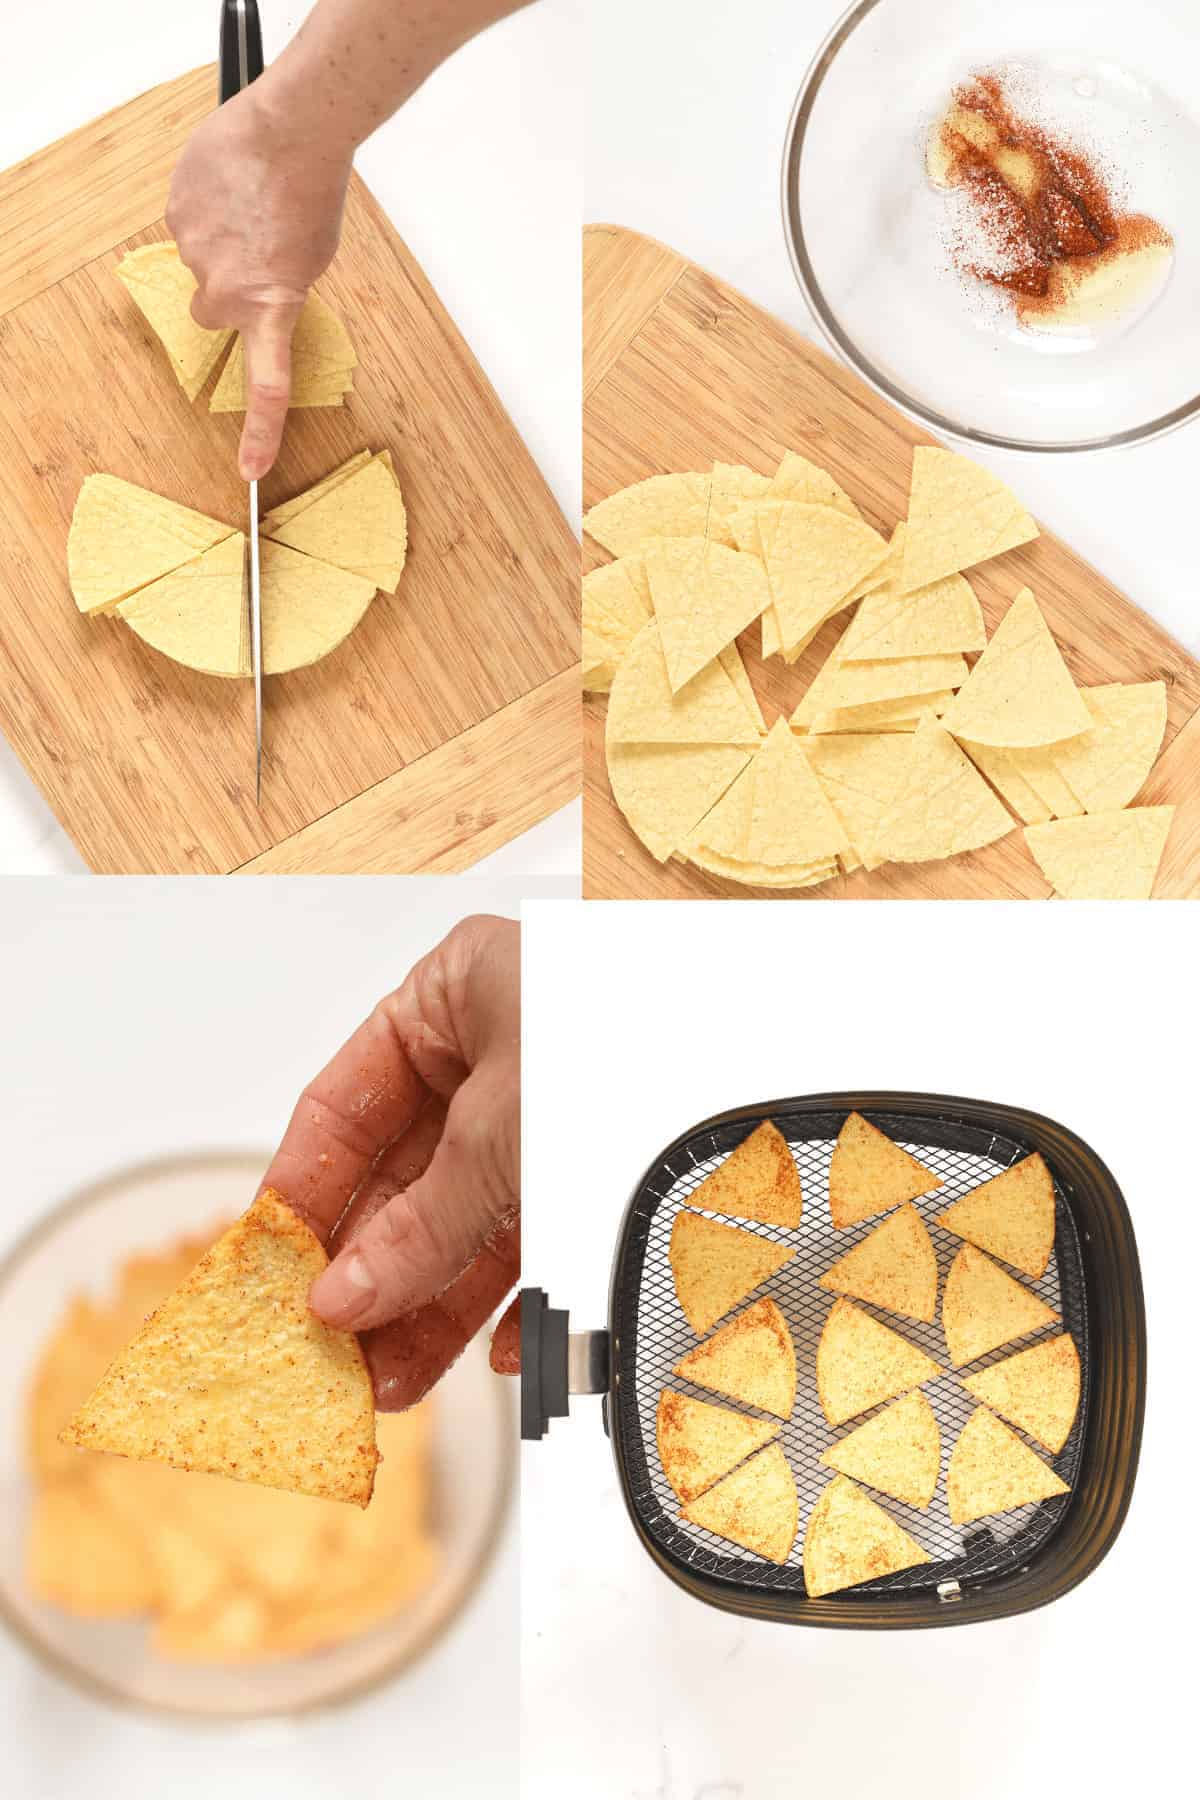 How to make Air Fryer Tortilla ChipsHow to make Air Fryer Tortilla Chips